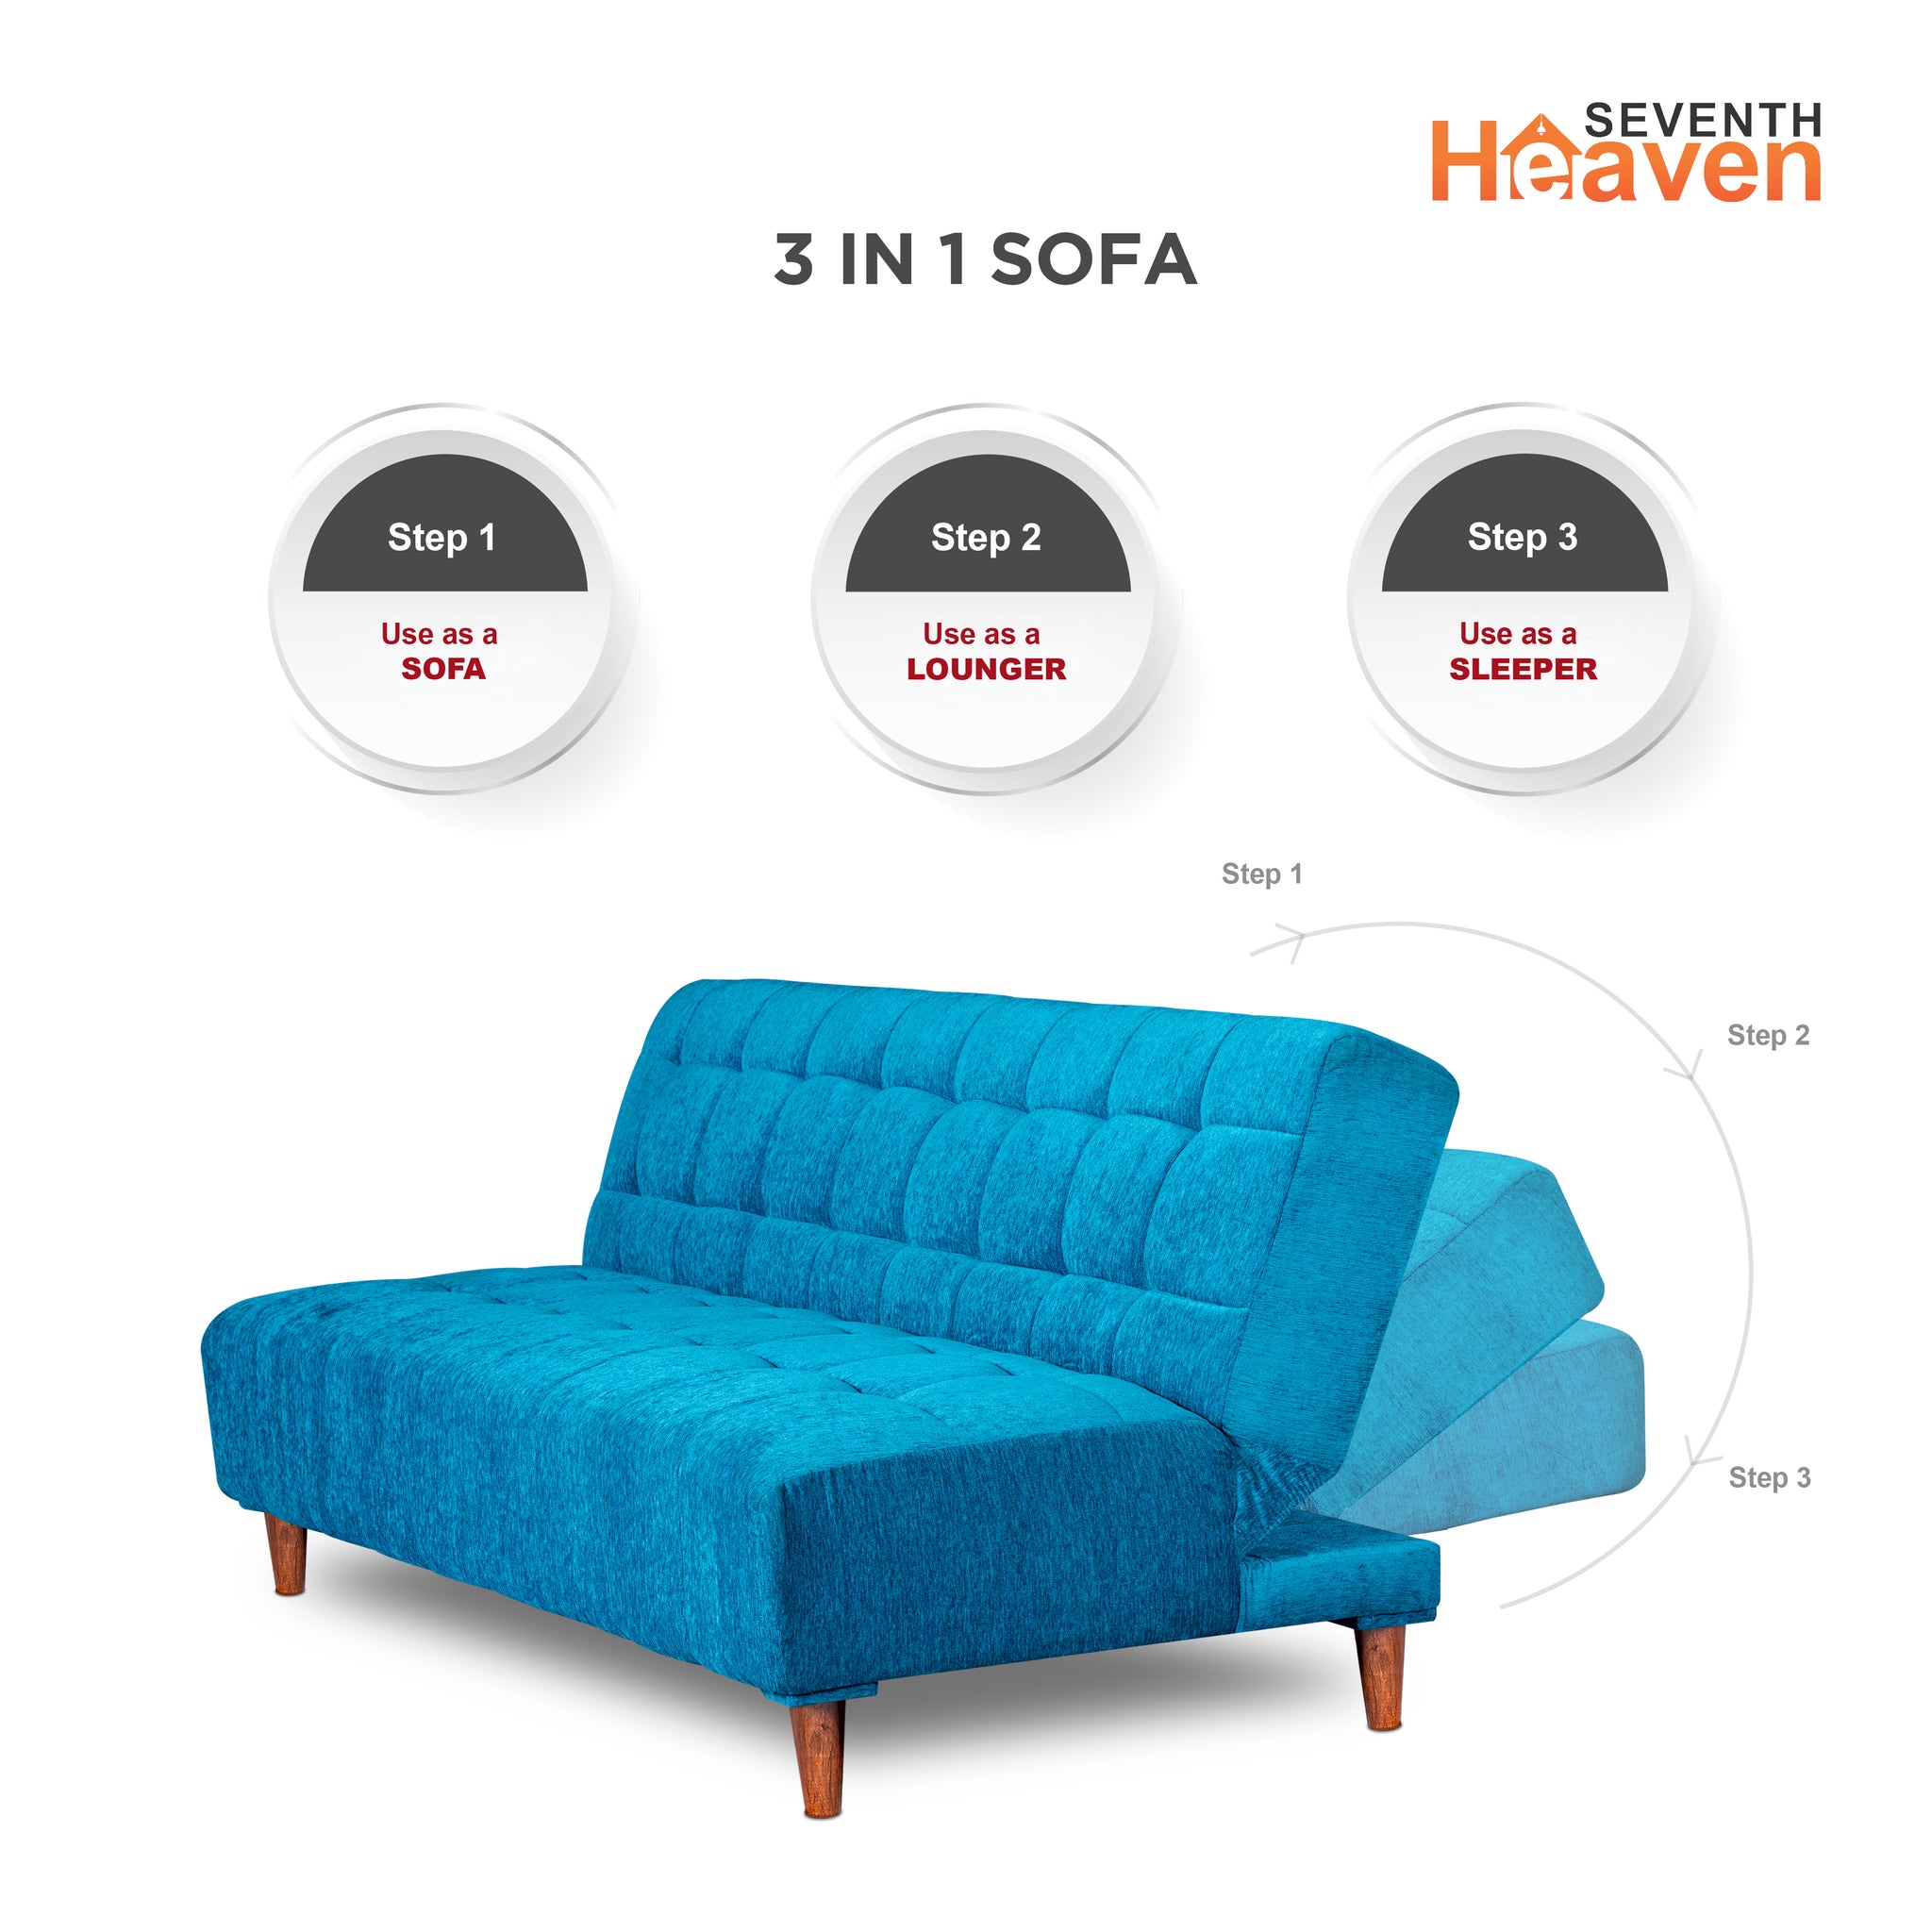 Seventh Heaven Florida 4 Seater Wooden Sofa Cum Bed. Modern & Elegant Smart Furniture Range for luxurious homes, living rooms and offices. Use as a sofa, lounger or bed. Perfect for guests. Molphino fabric with sheesham polished wooden legs. Sky Blue colour.